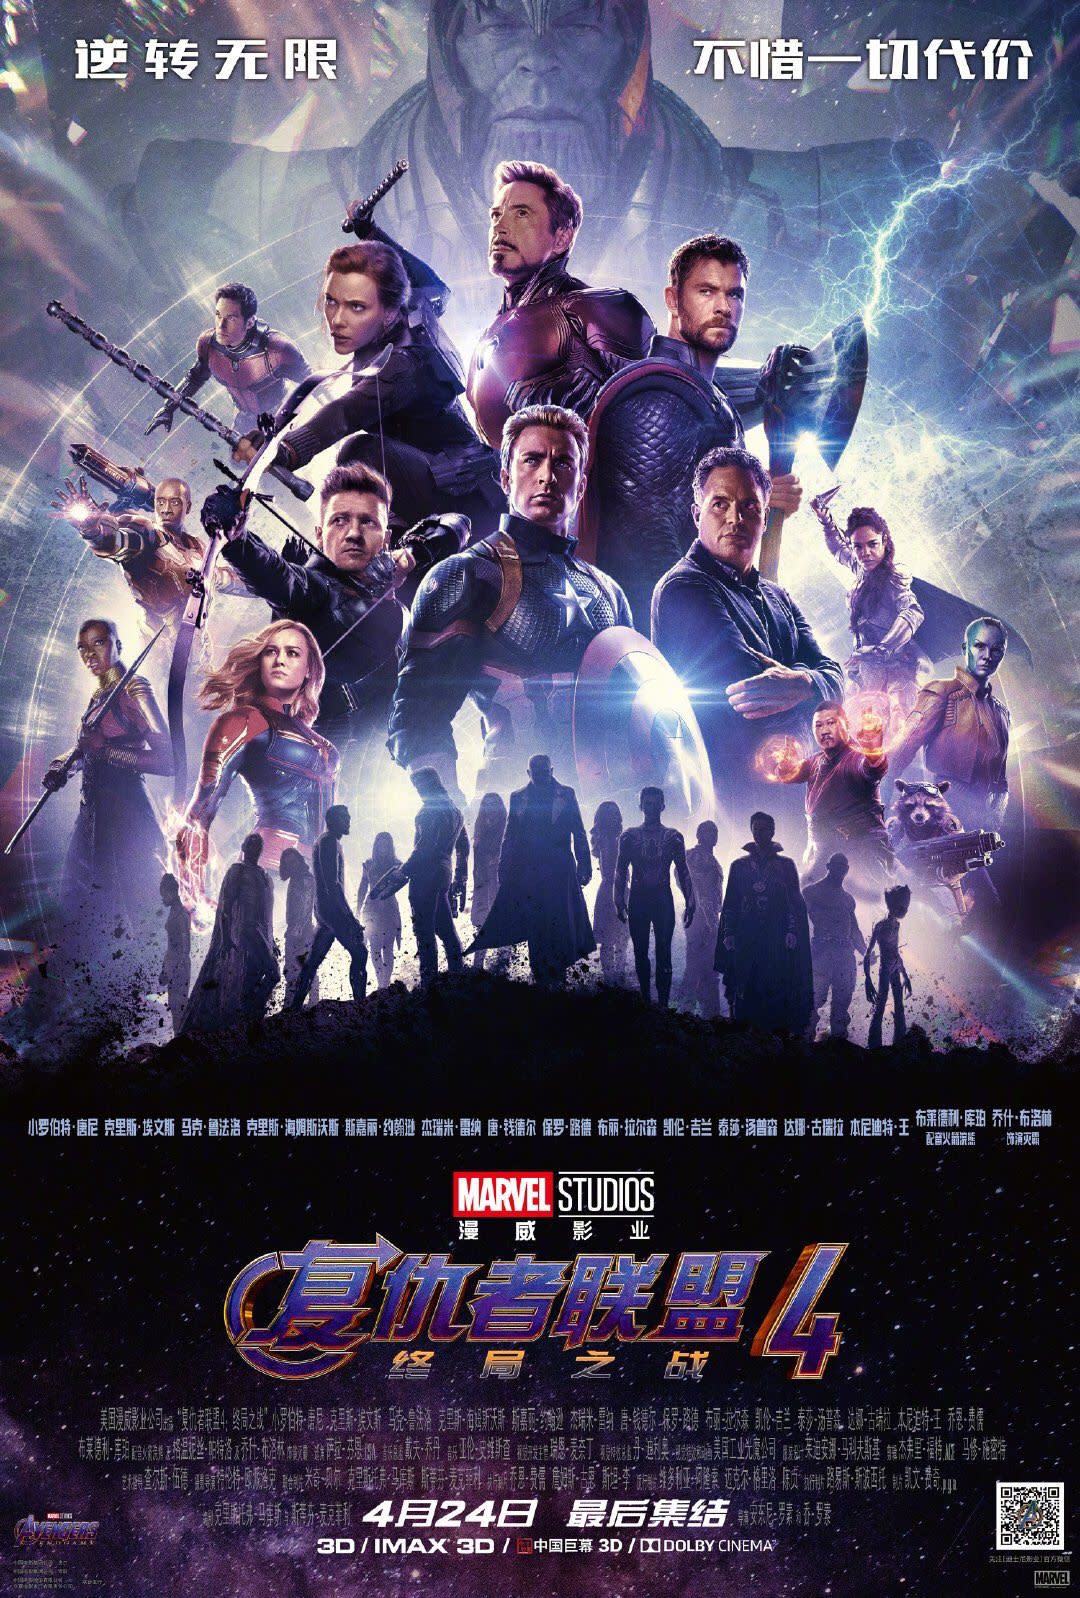 Avengers EndGame: Snapped Out of it - Survi Reviews